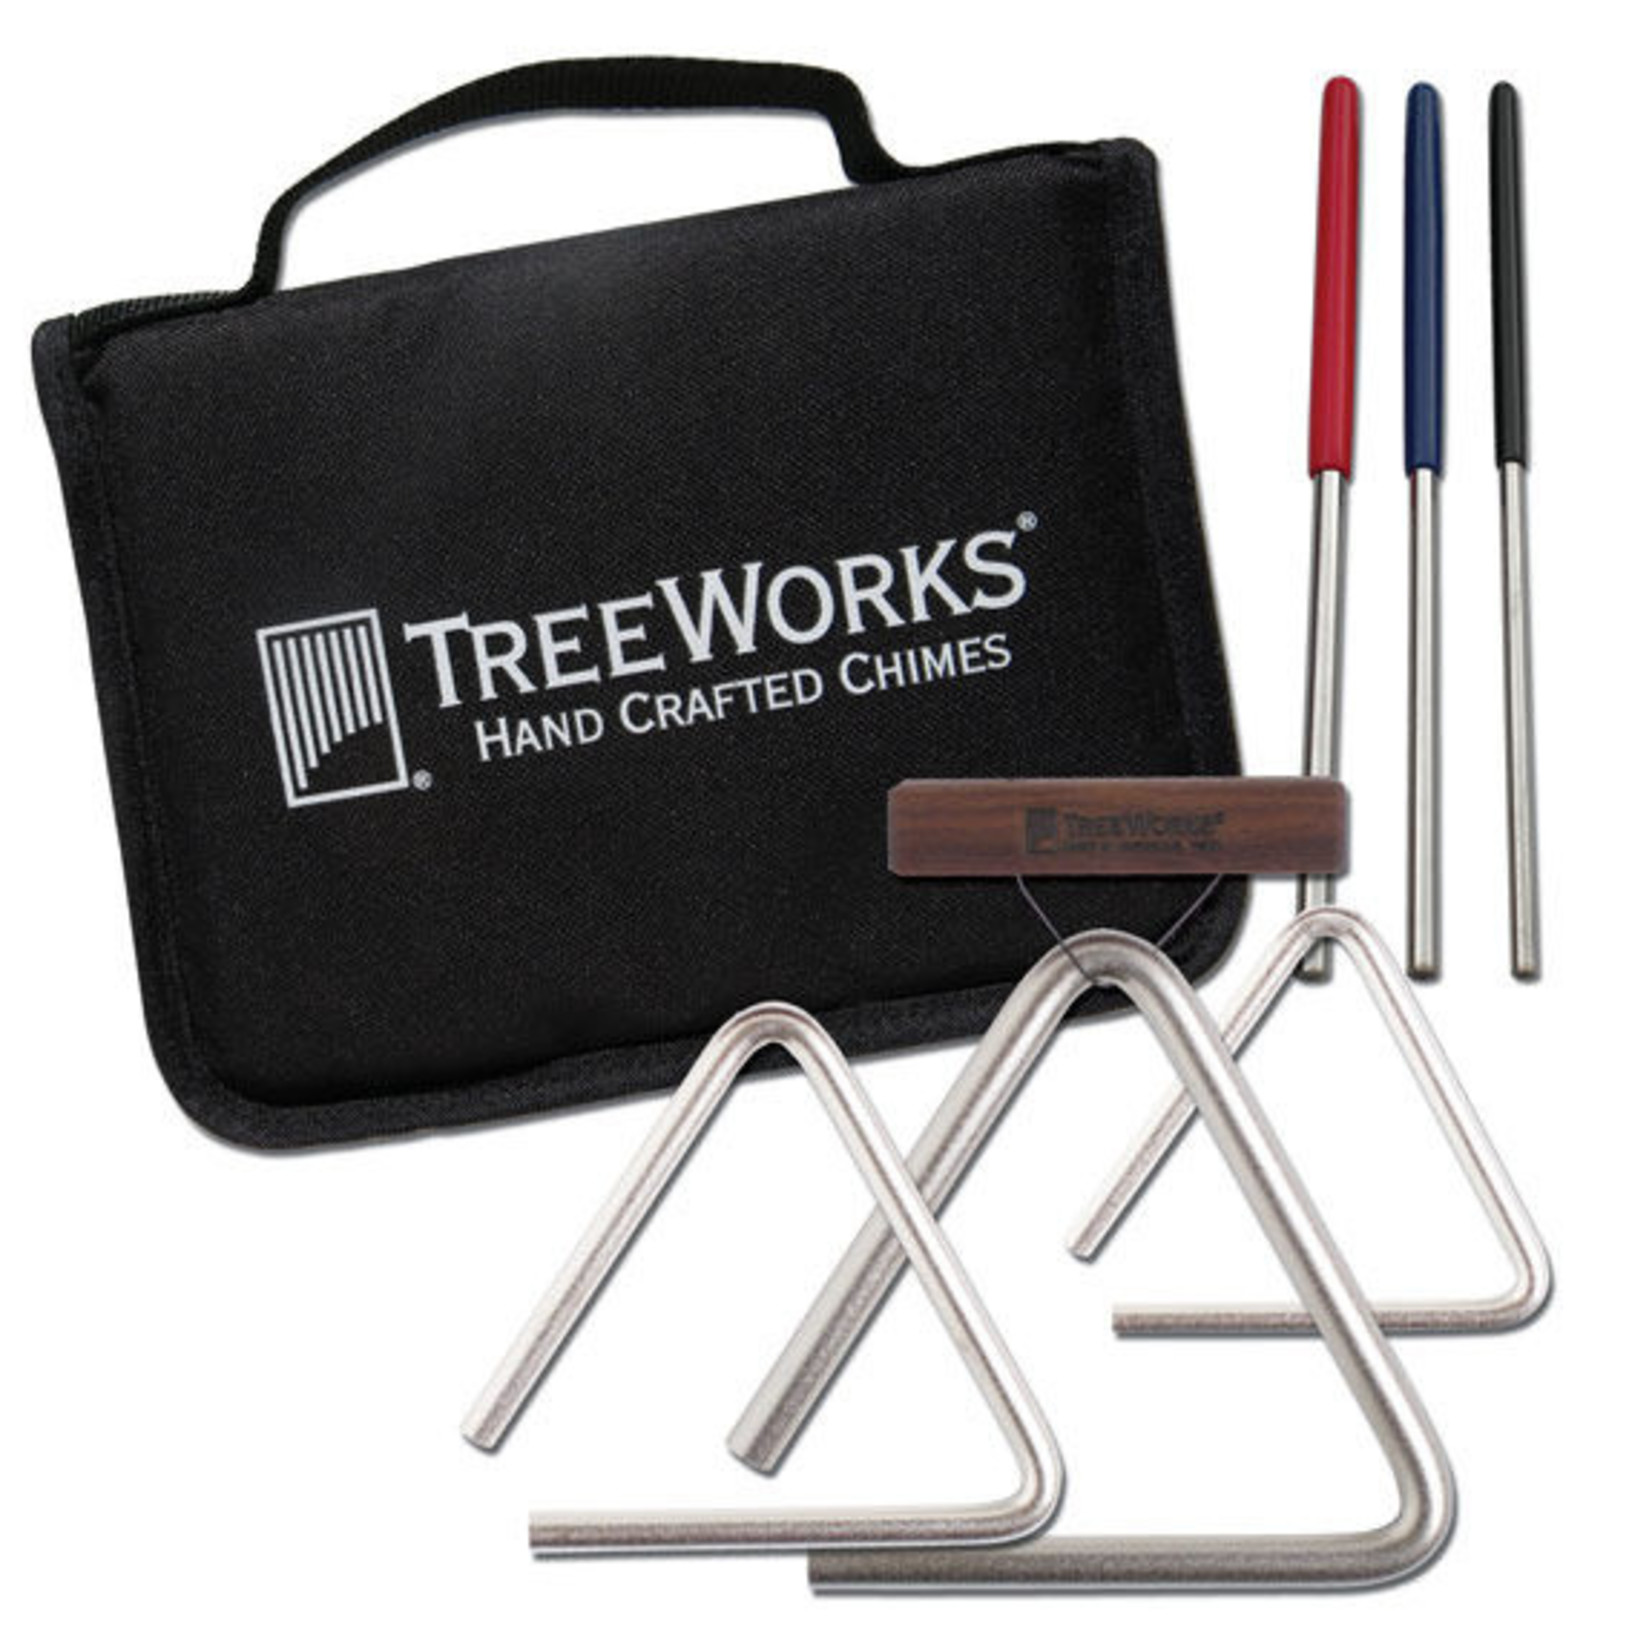 Treeworks TRE-57bp Studio-Grade Triangle Set with Beaters & Bag